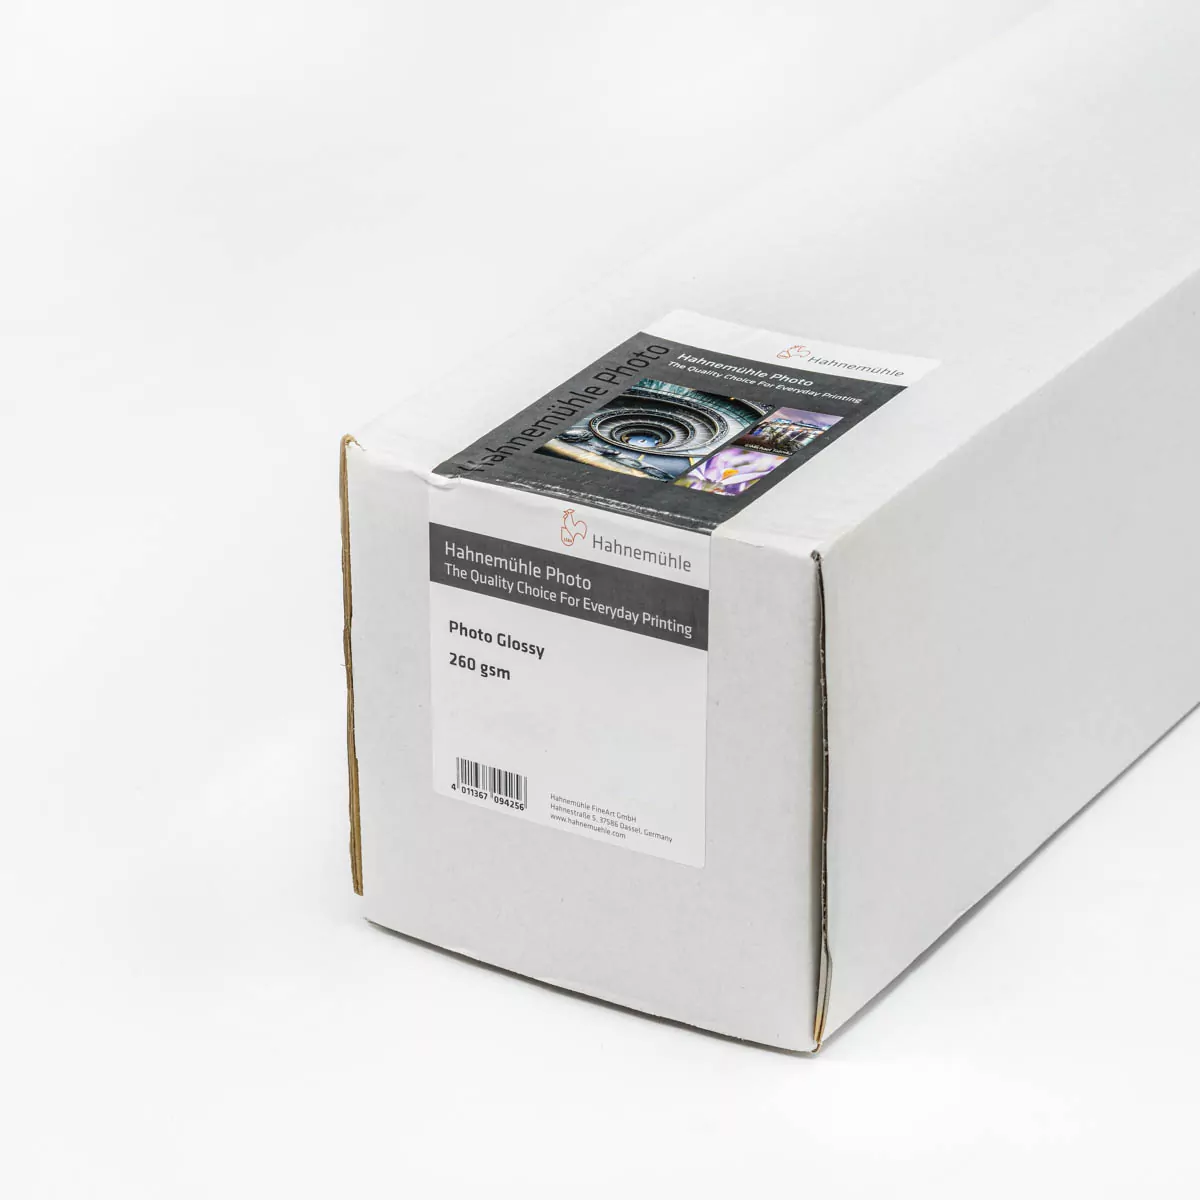 Hahnemuhle Photo Glossy 260 gsm 24”(61cm)x30m roll